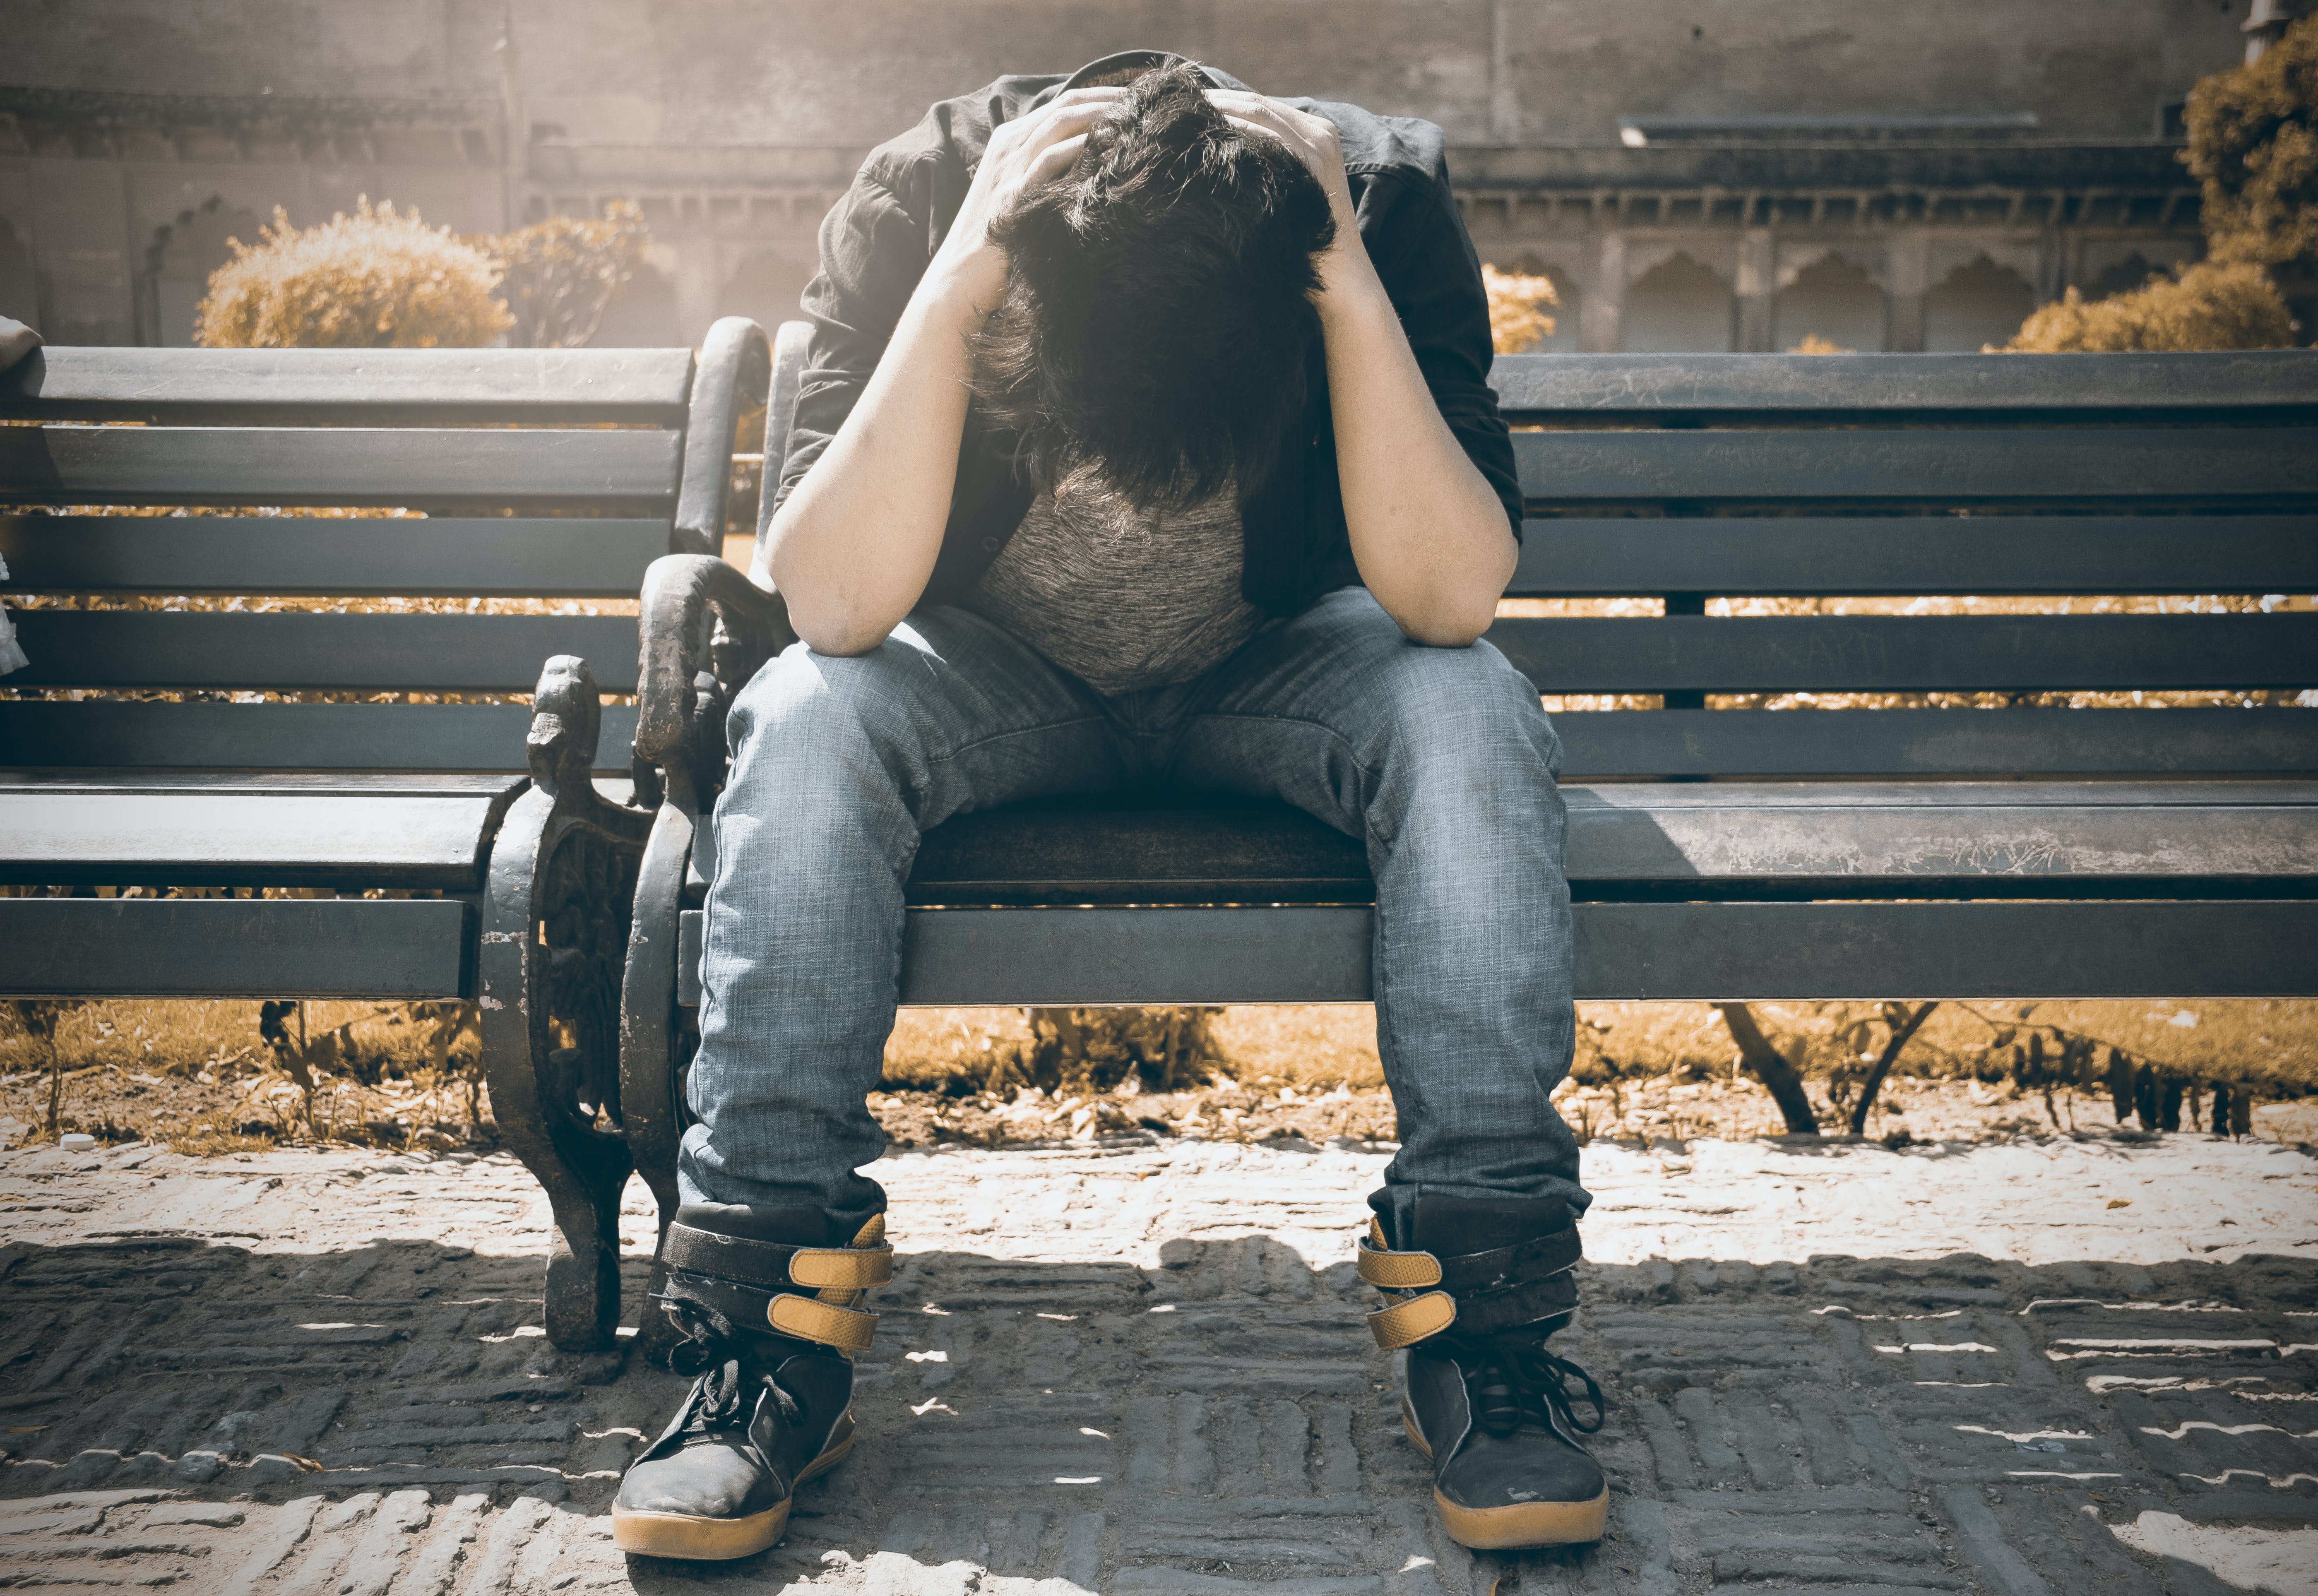 An upset man sitting on a bench facing down with his hands over his head | Source: Pexels